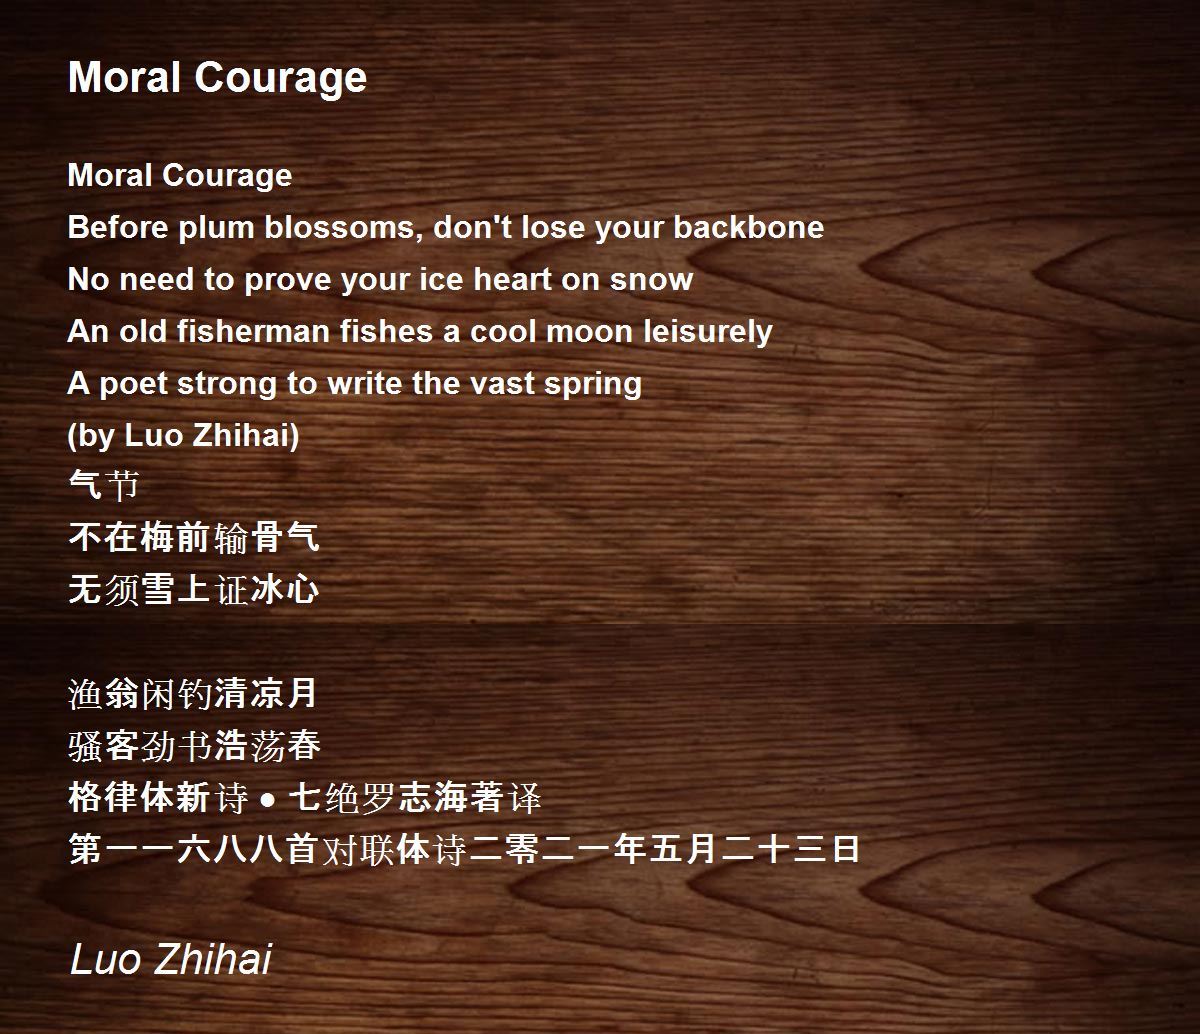 Moral Courage - Moral Courage Poem by Luo Zhihai